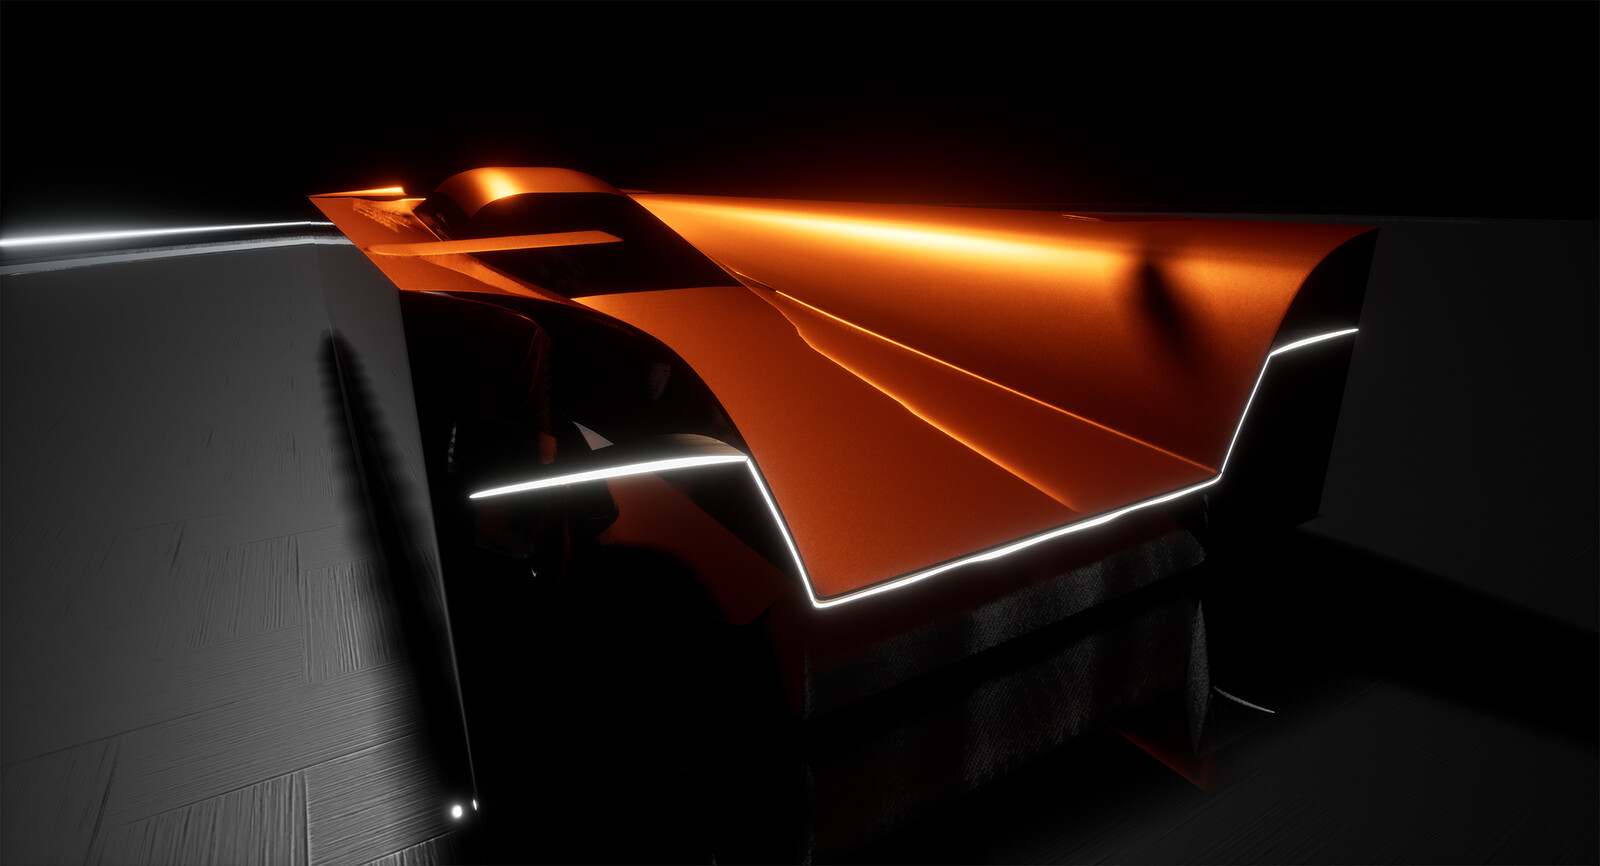 Industrial Punk Electric Car - Modeled in Maya and rendered in Unreal Engine 4.25